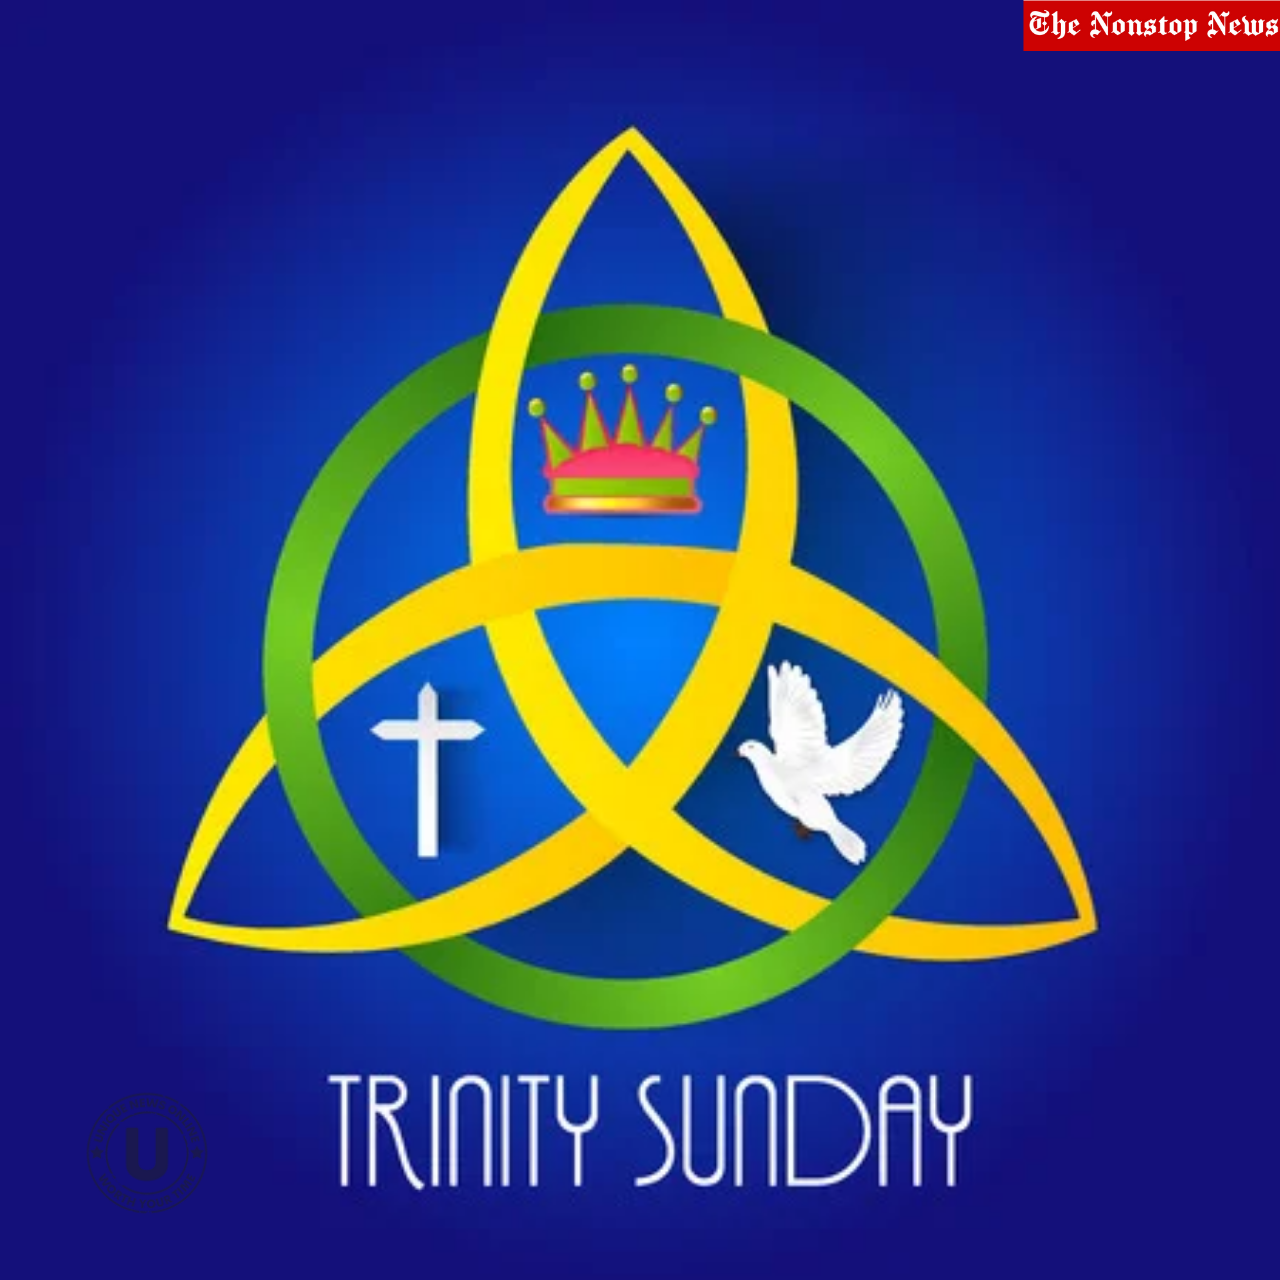 Trinity Sunday 2022: Wishes, Quotes, Images, Messages, Greetings, Posters, Sayings to Share